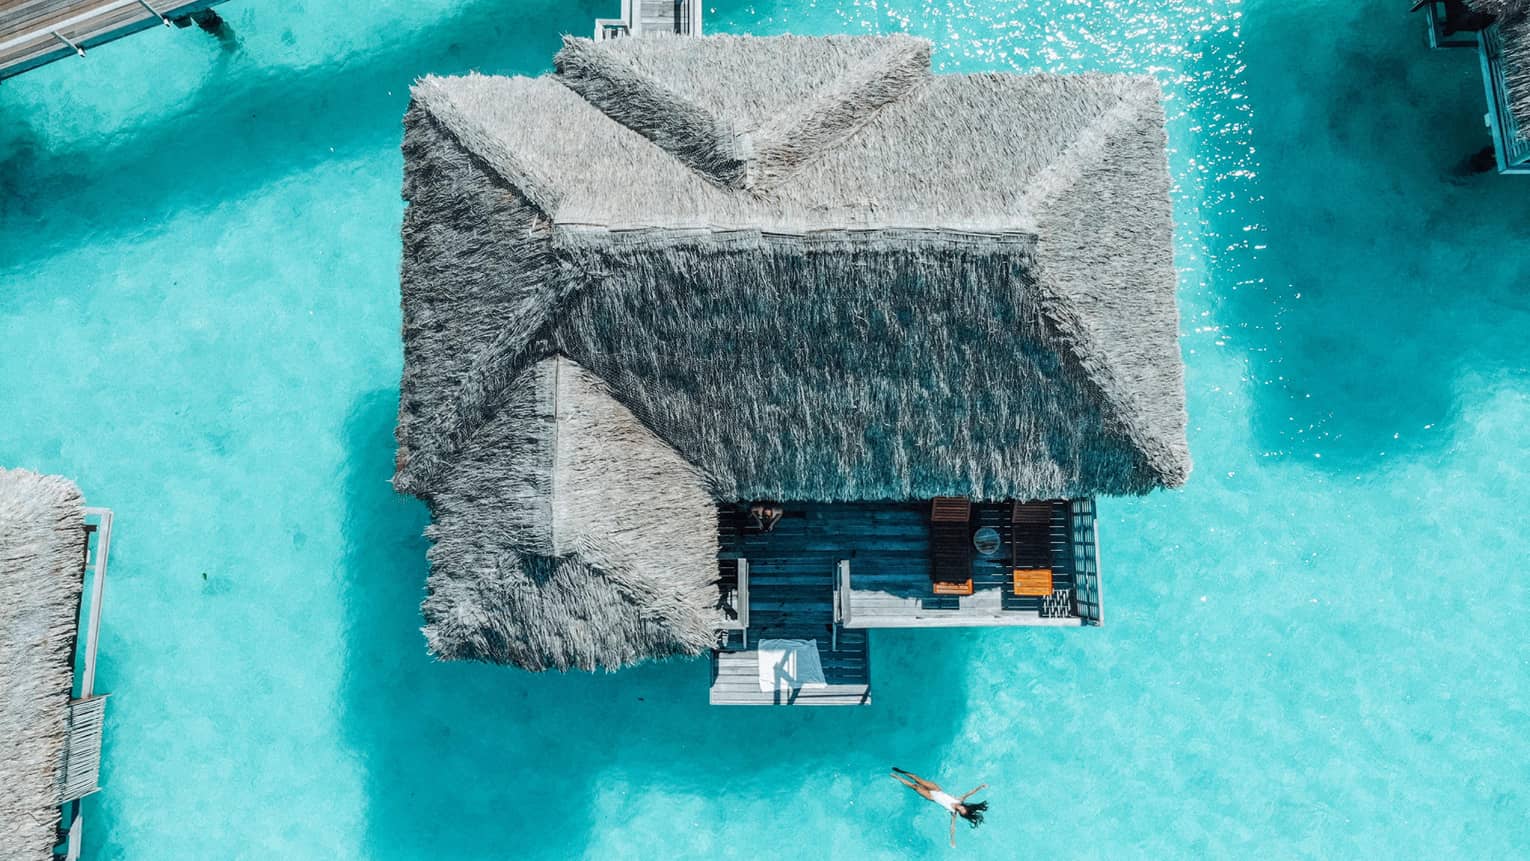 Aerial view of person swimming away from overwater bungalow in turquoise lagoon